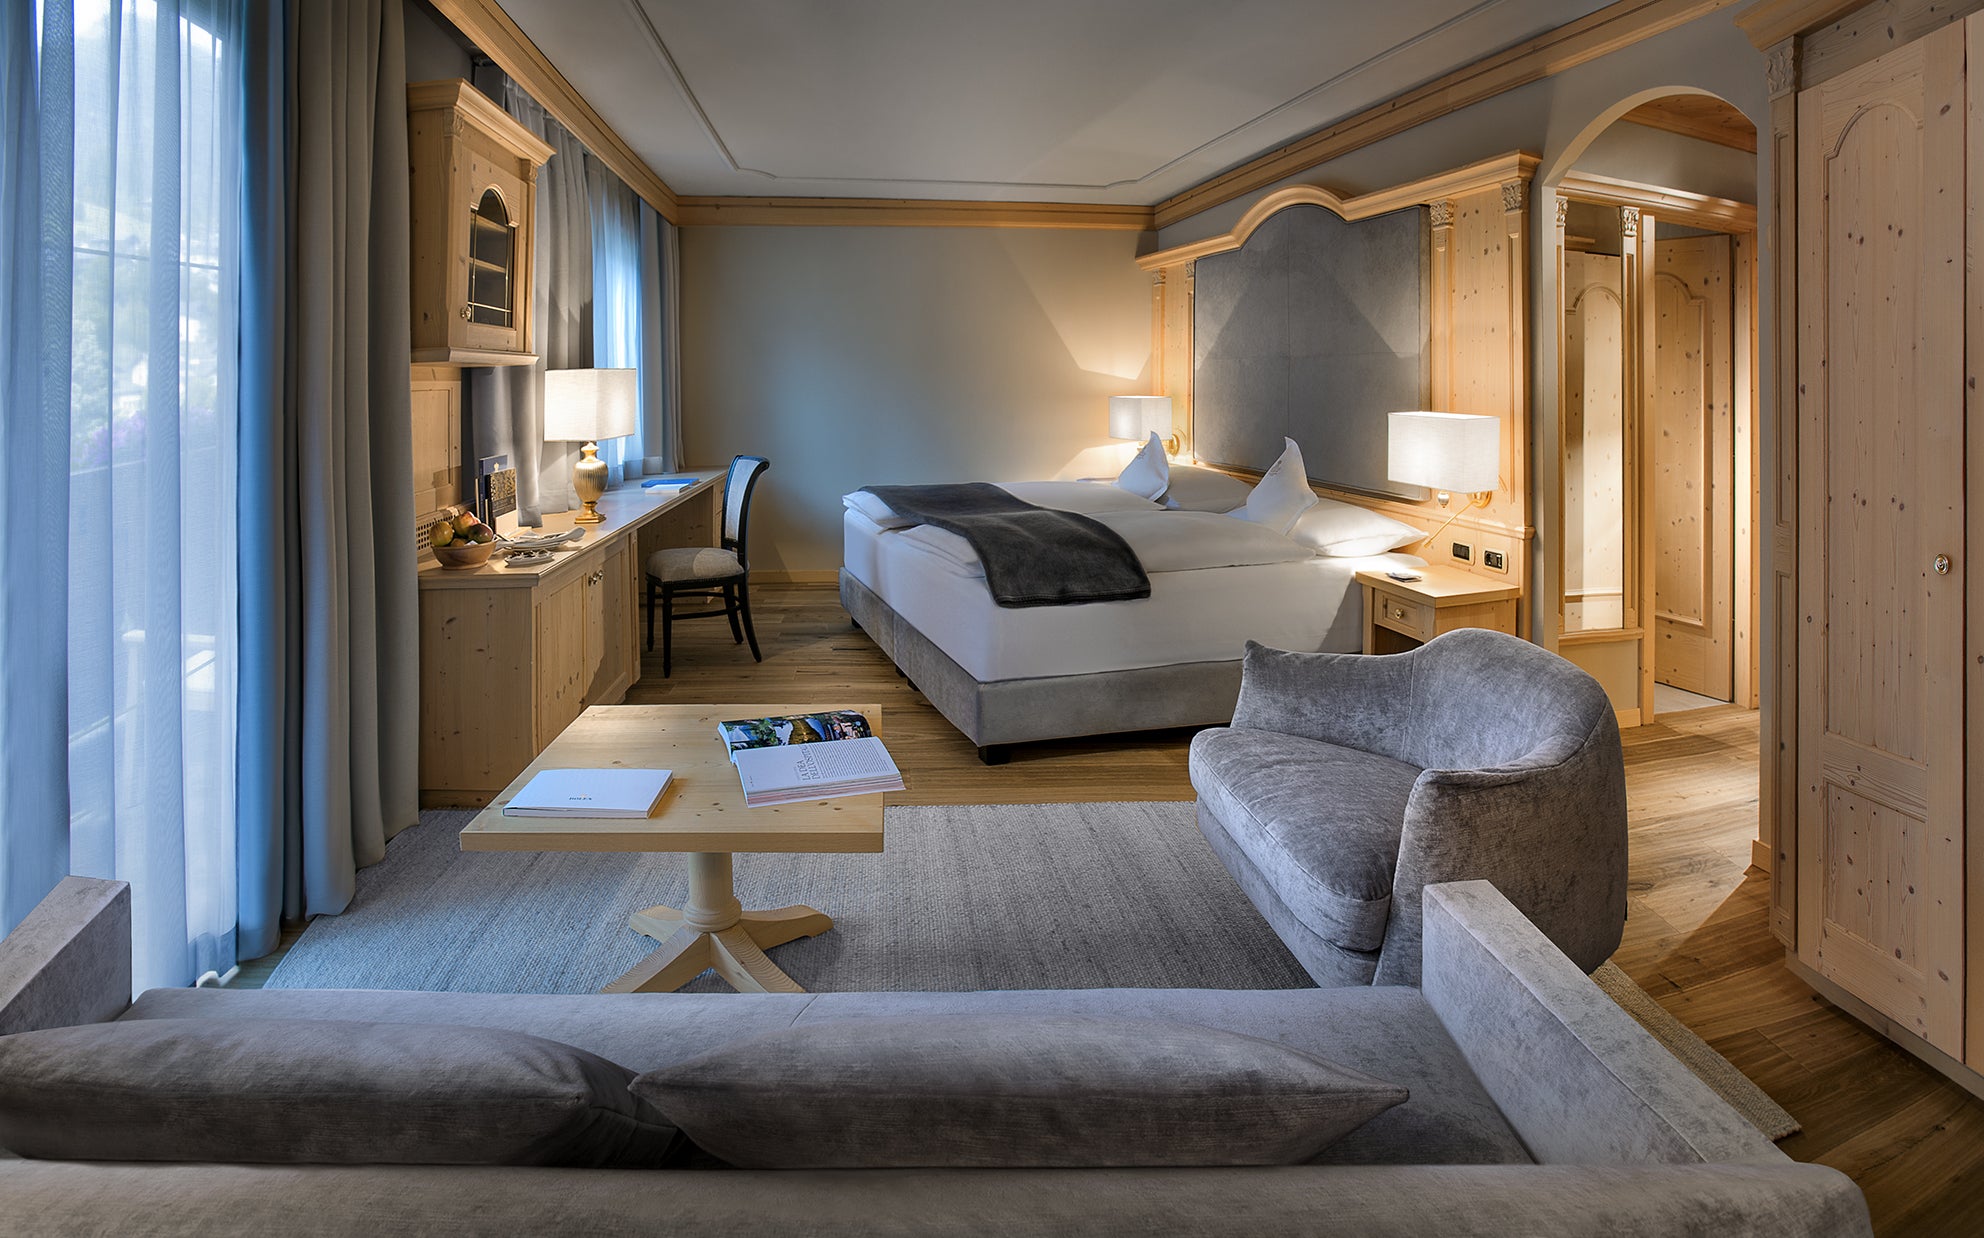 The rooms at Gardena Grodnerhof are spacious with a cosy, alpine feel